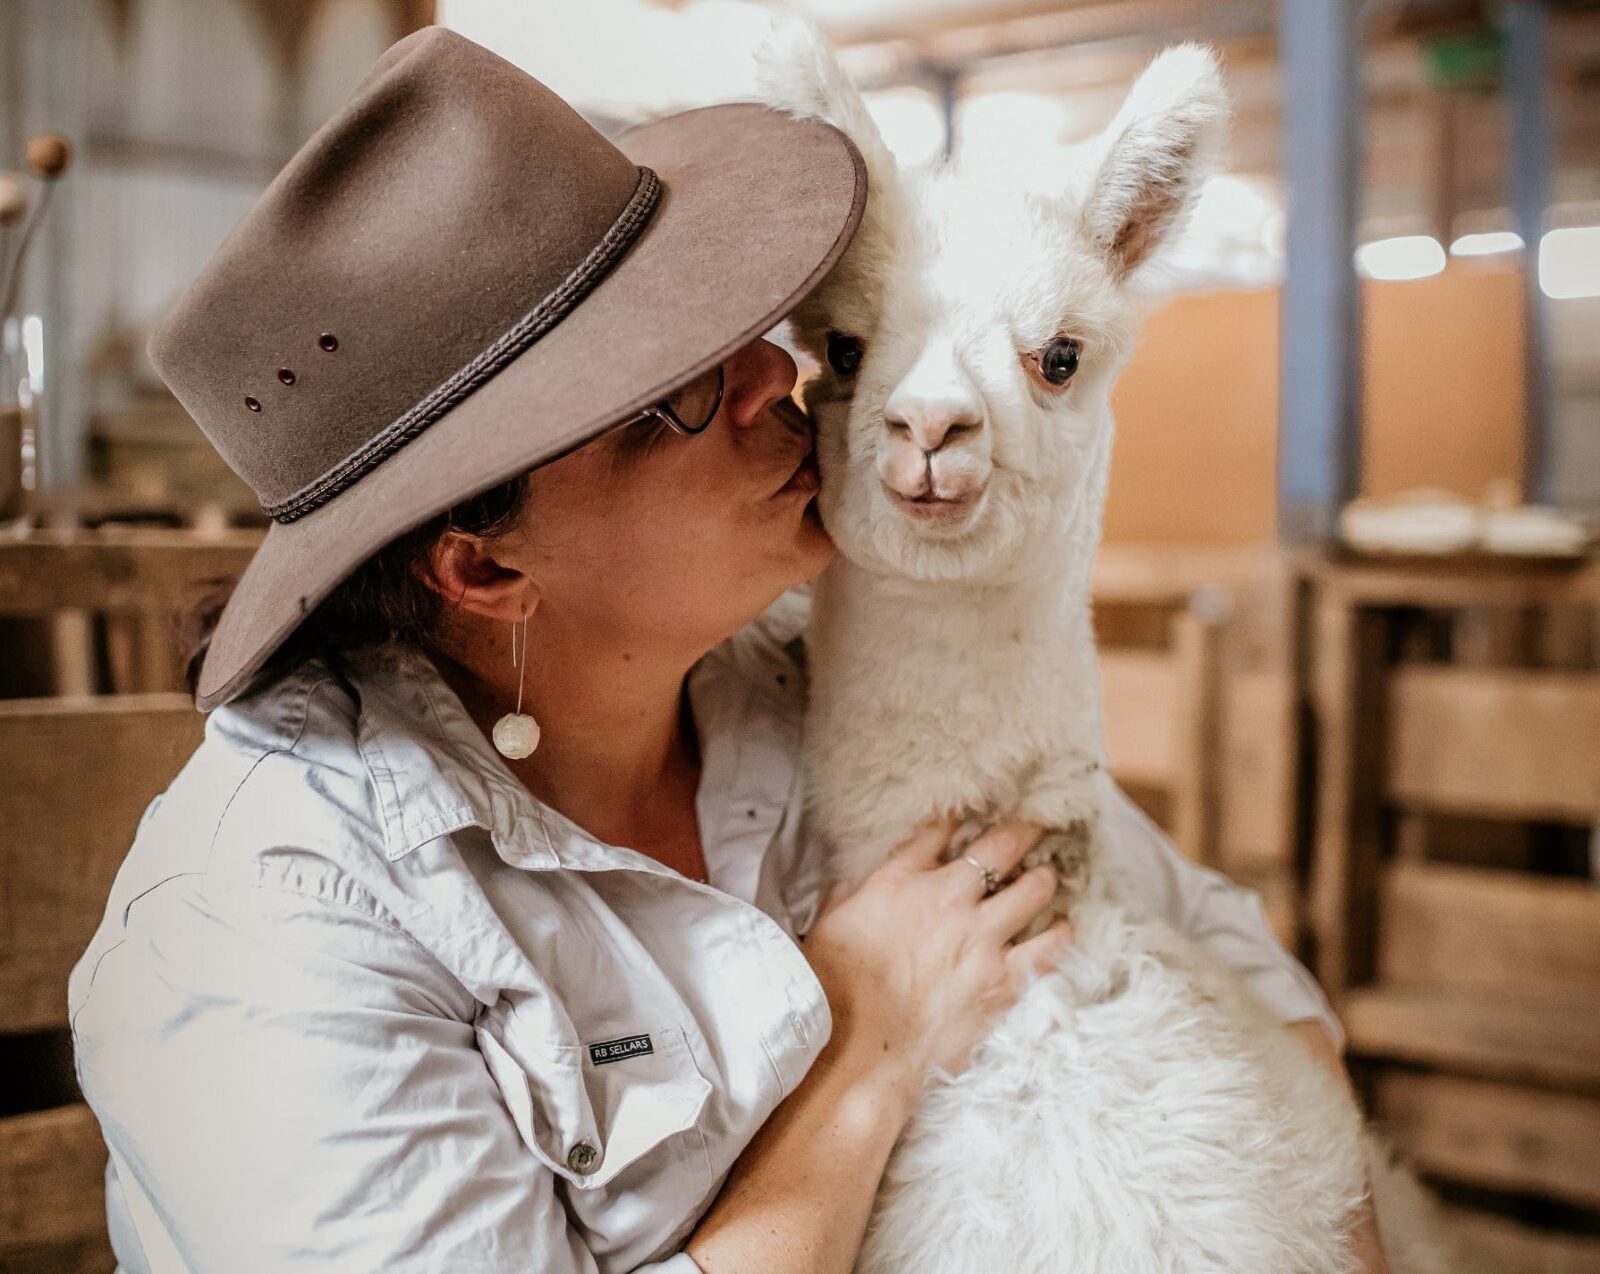 If you are really lucky you might be able to get a kiss from one of our friendly alpacas